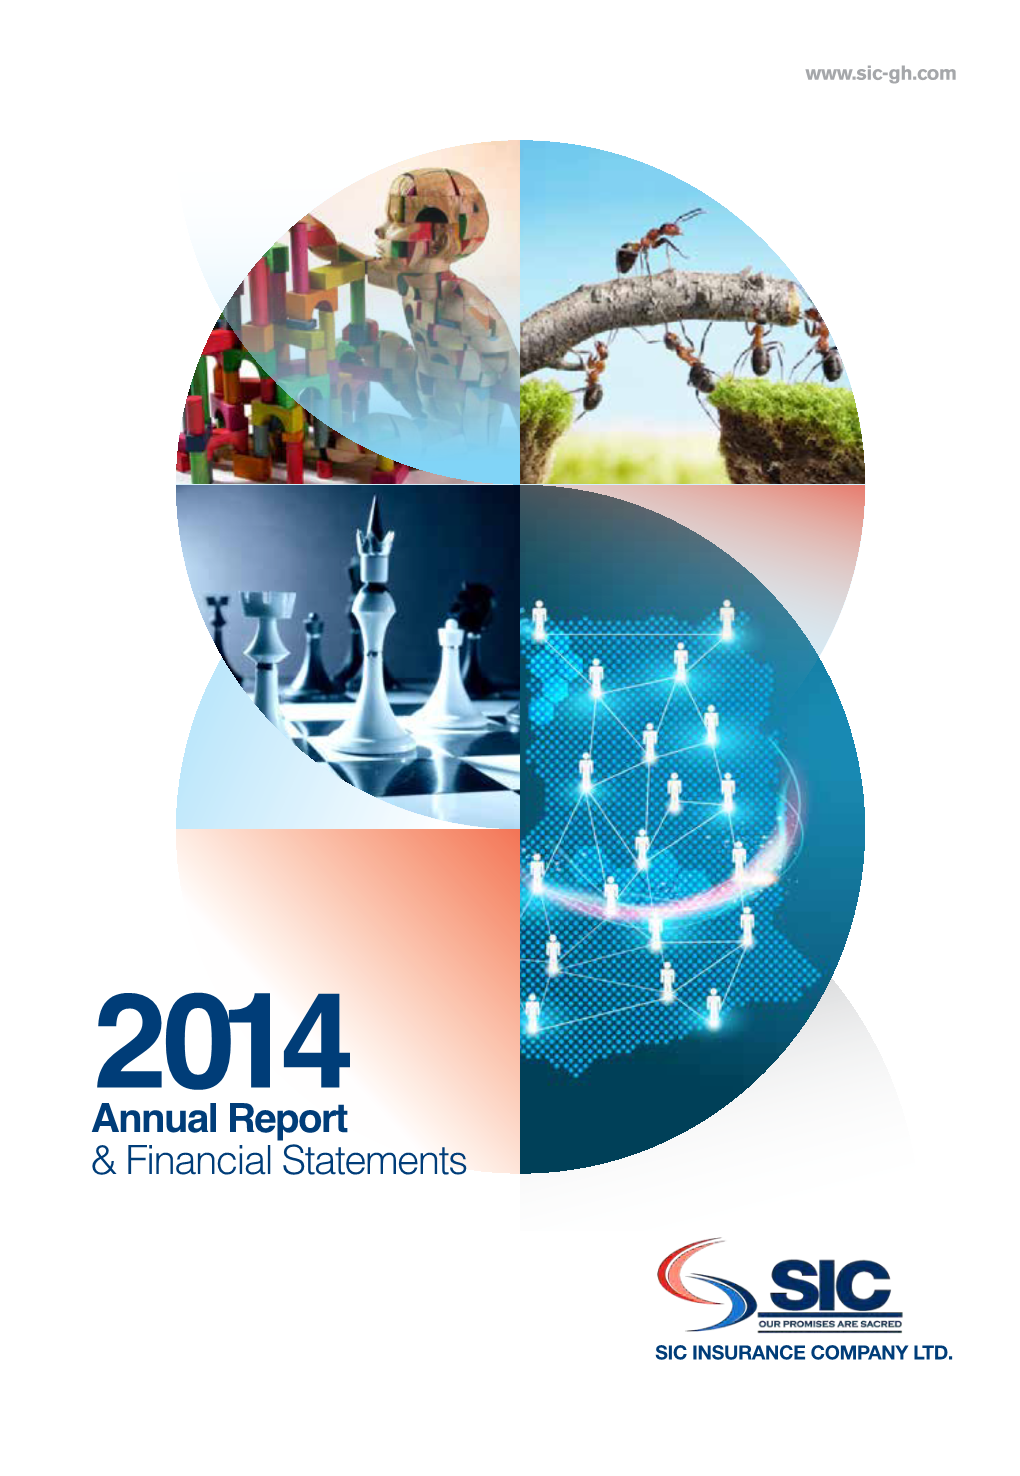 2014 Annual Report & Financial Statement